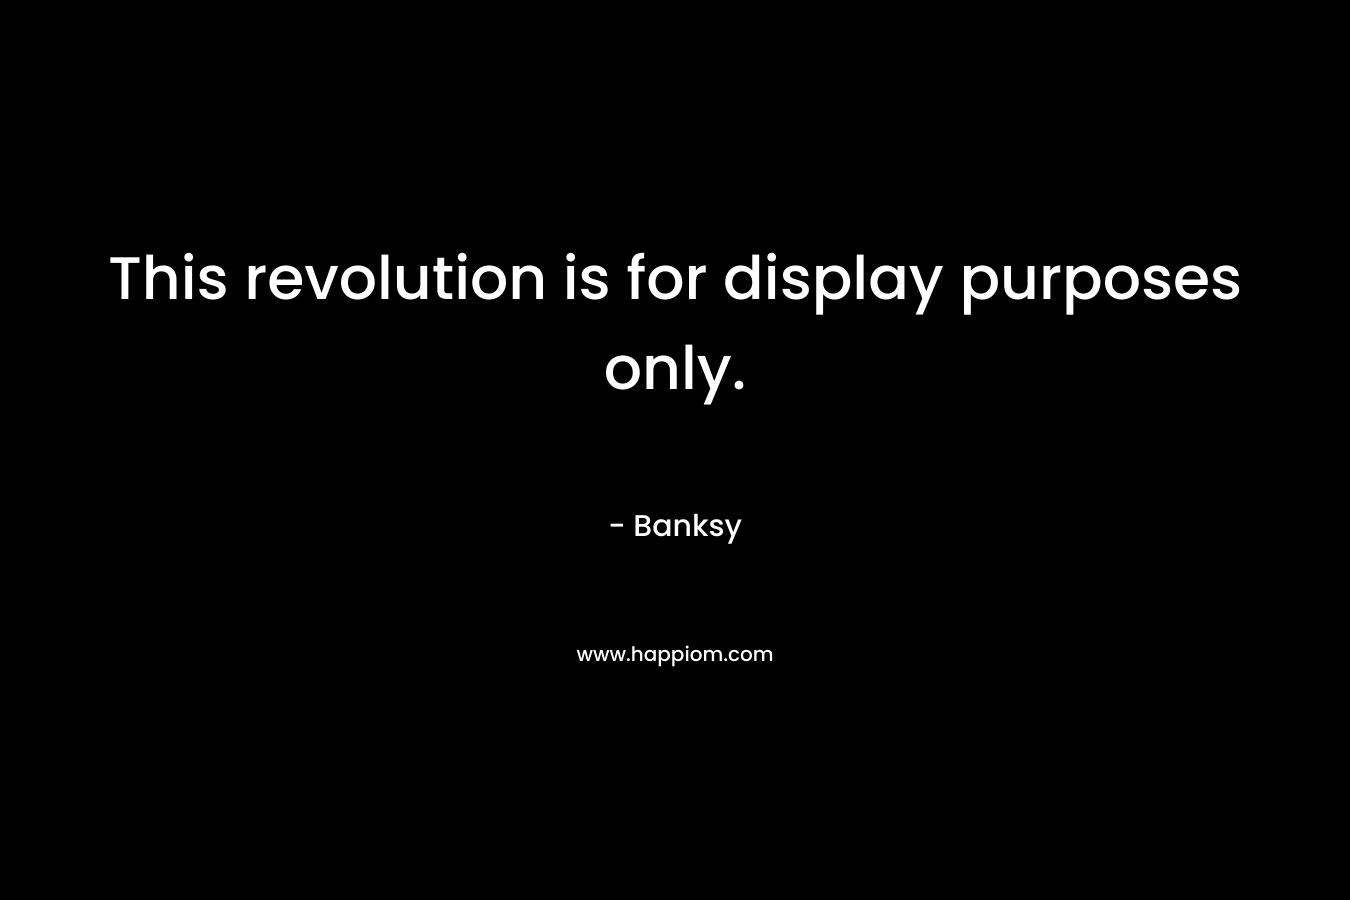 This revolution is for display purposes only.